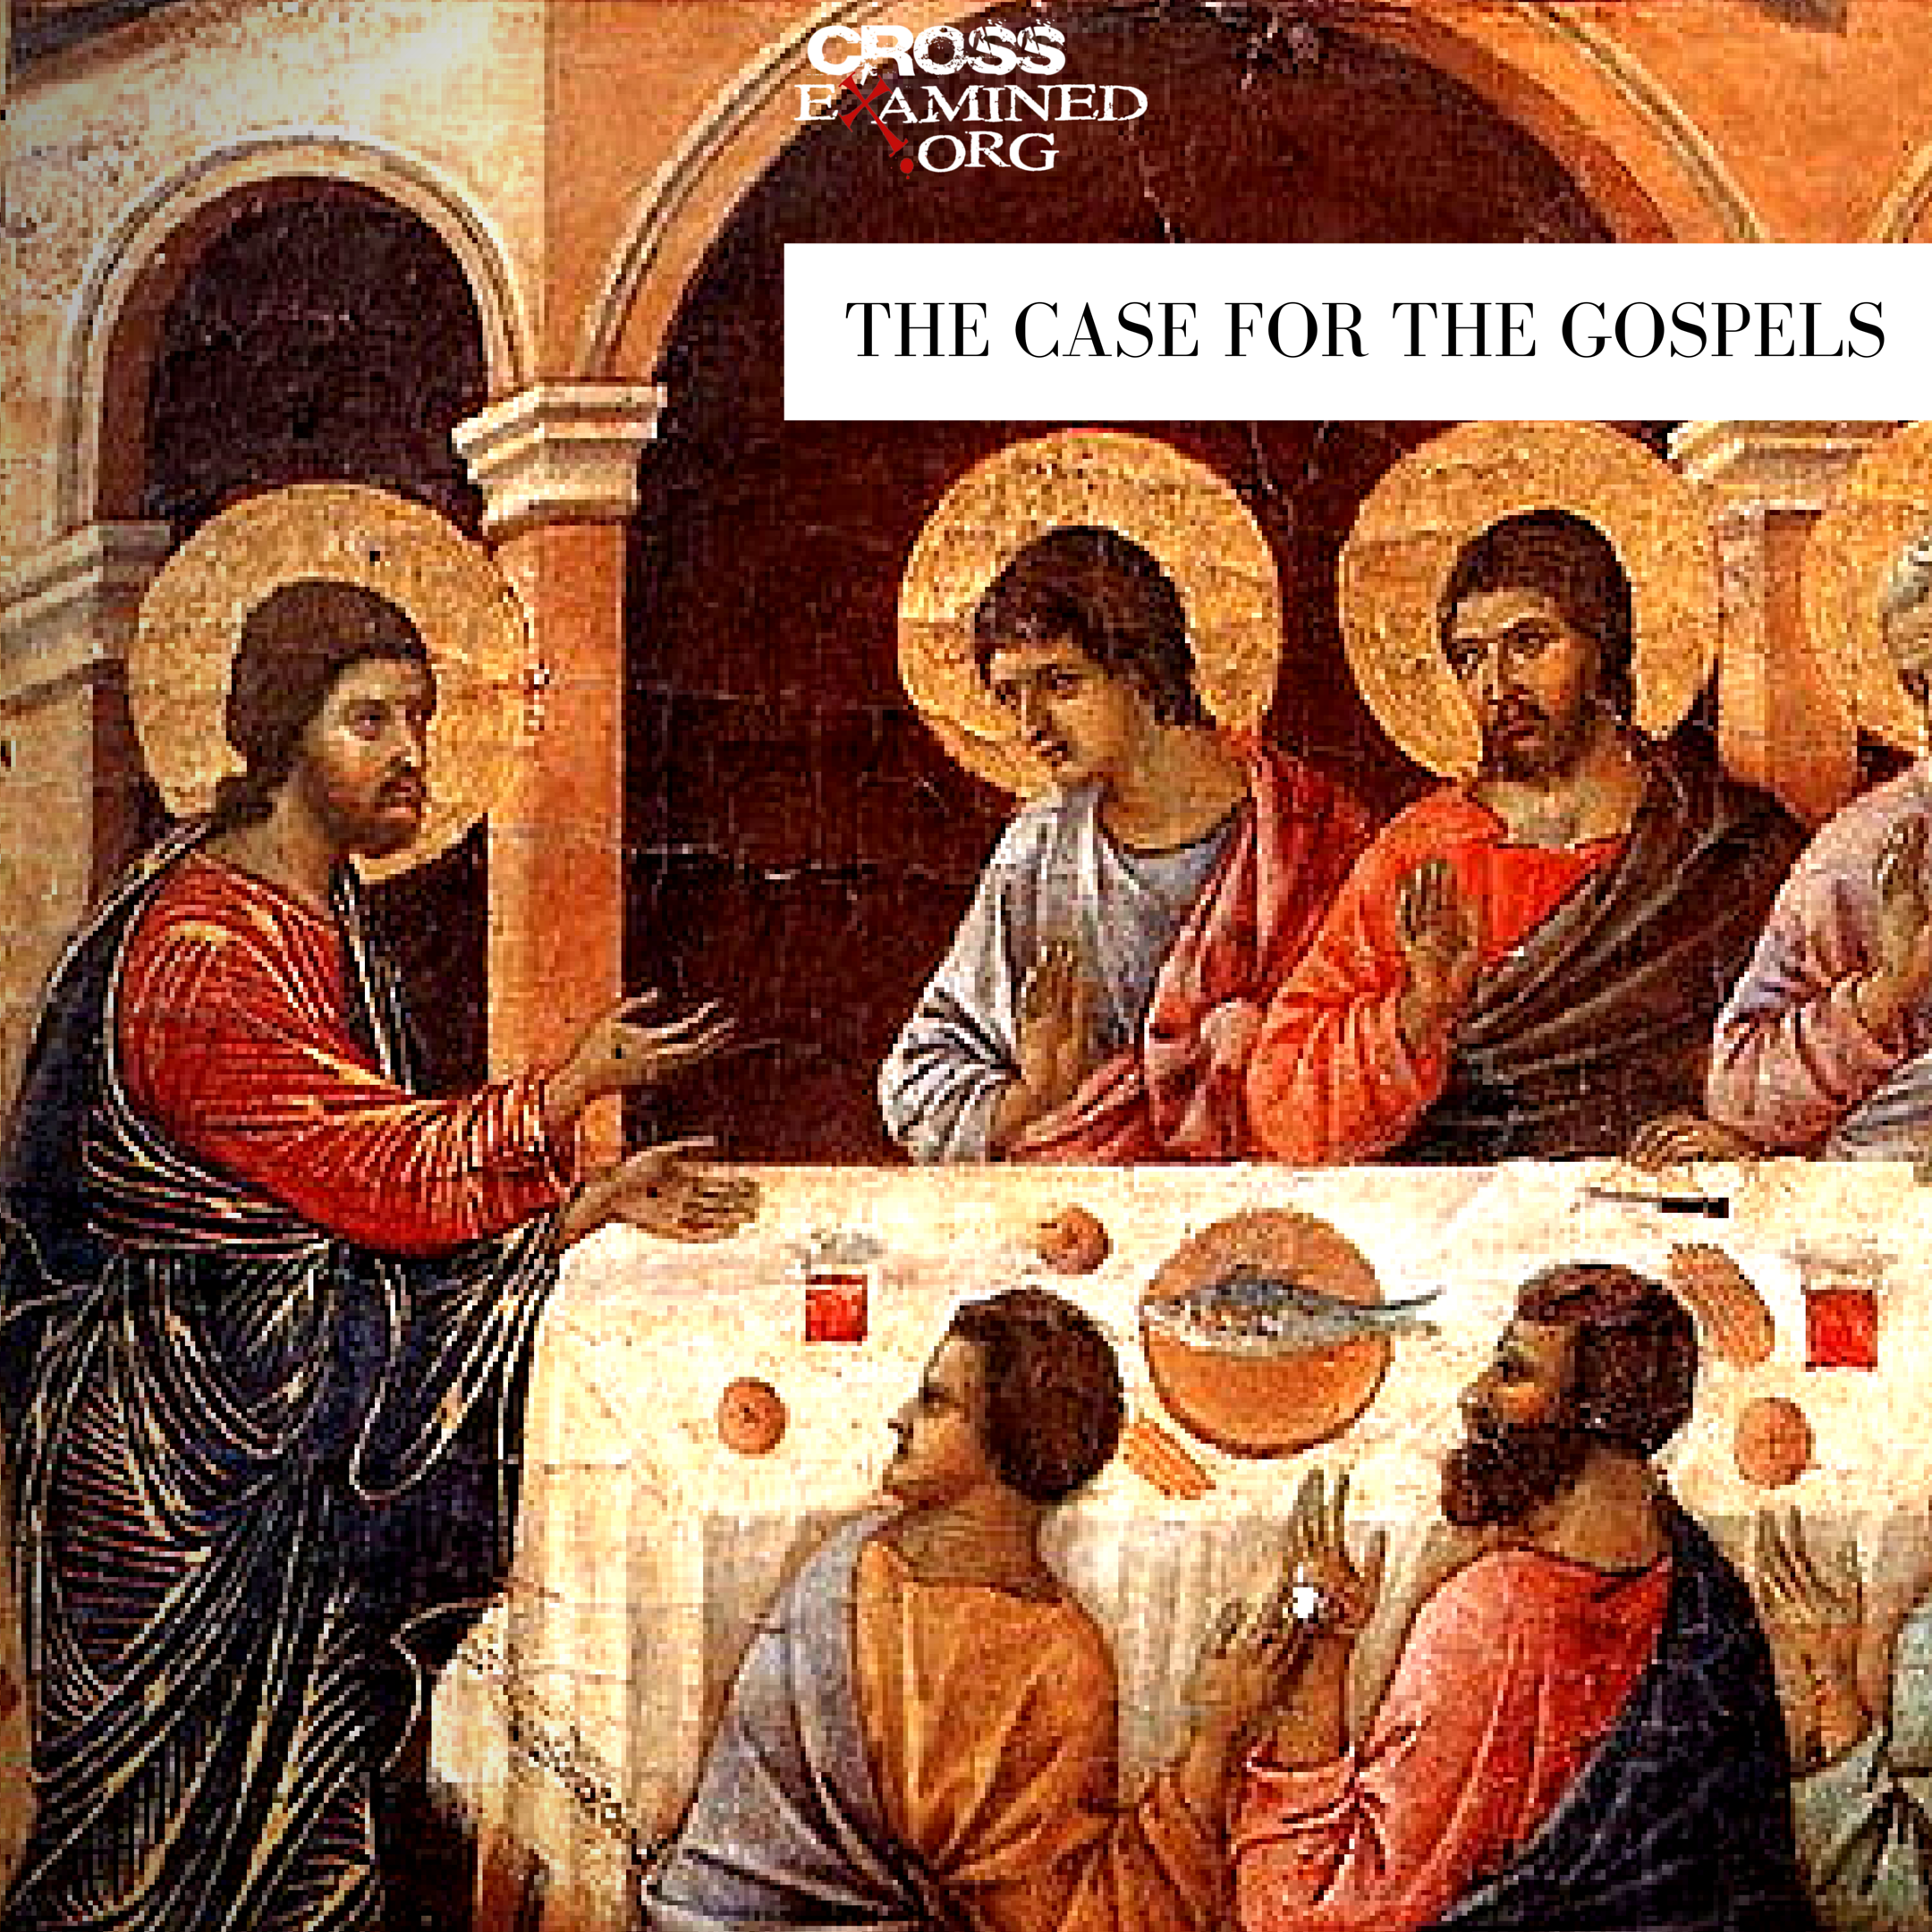 Examining Jesus by the Historical Method (Part 6: Eyewitness Testimony–The Case for the Gospels)